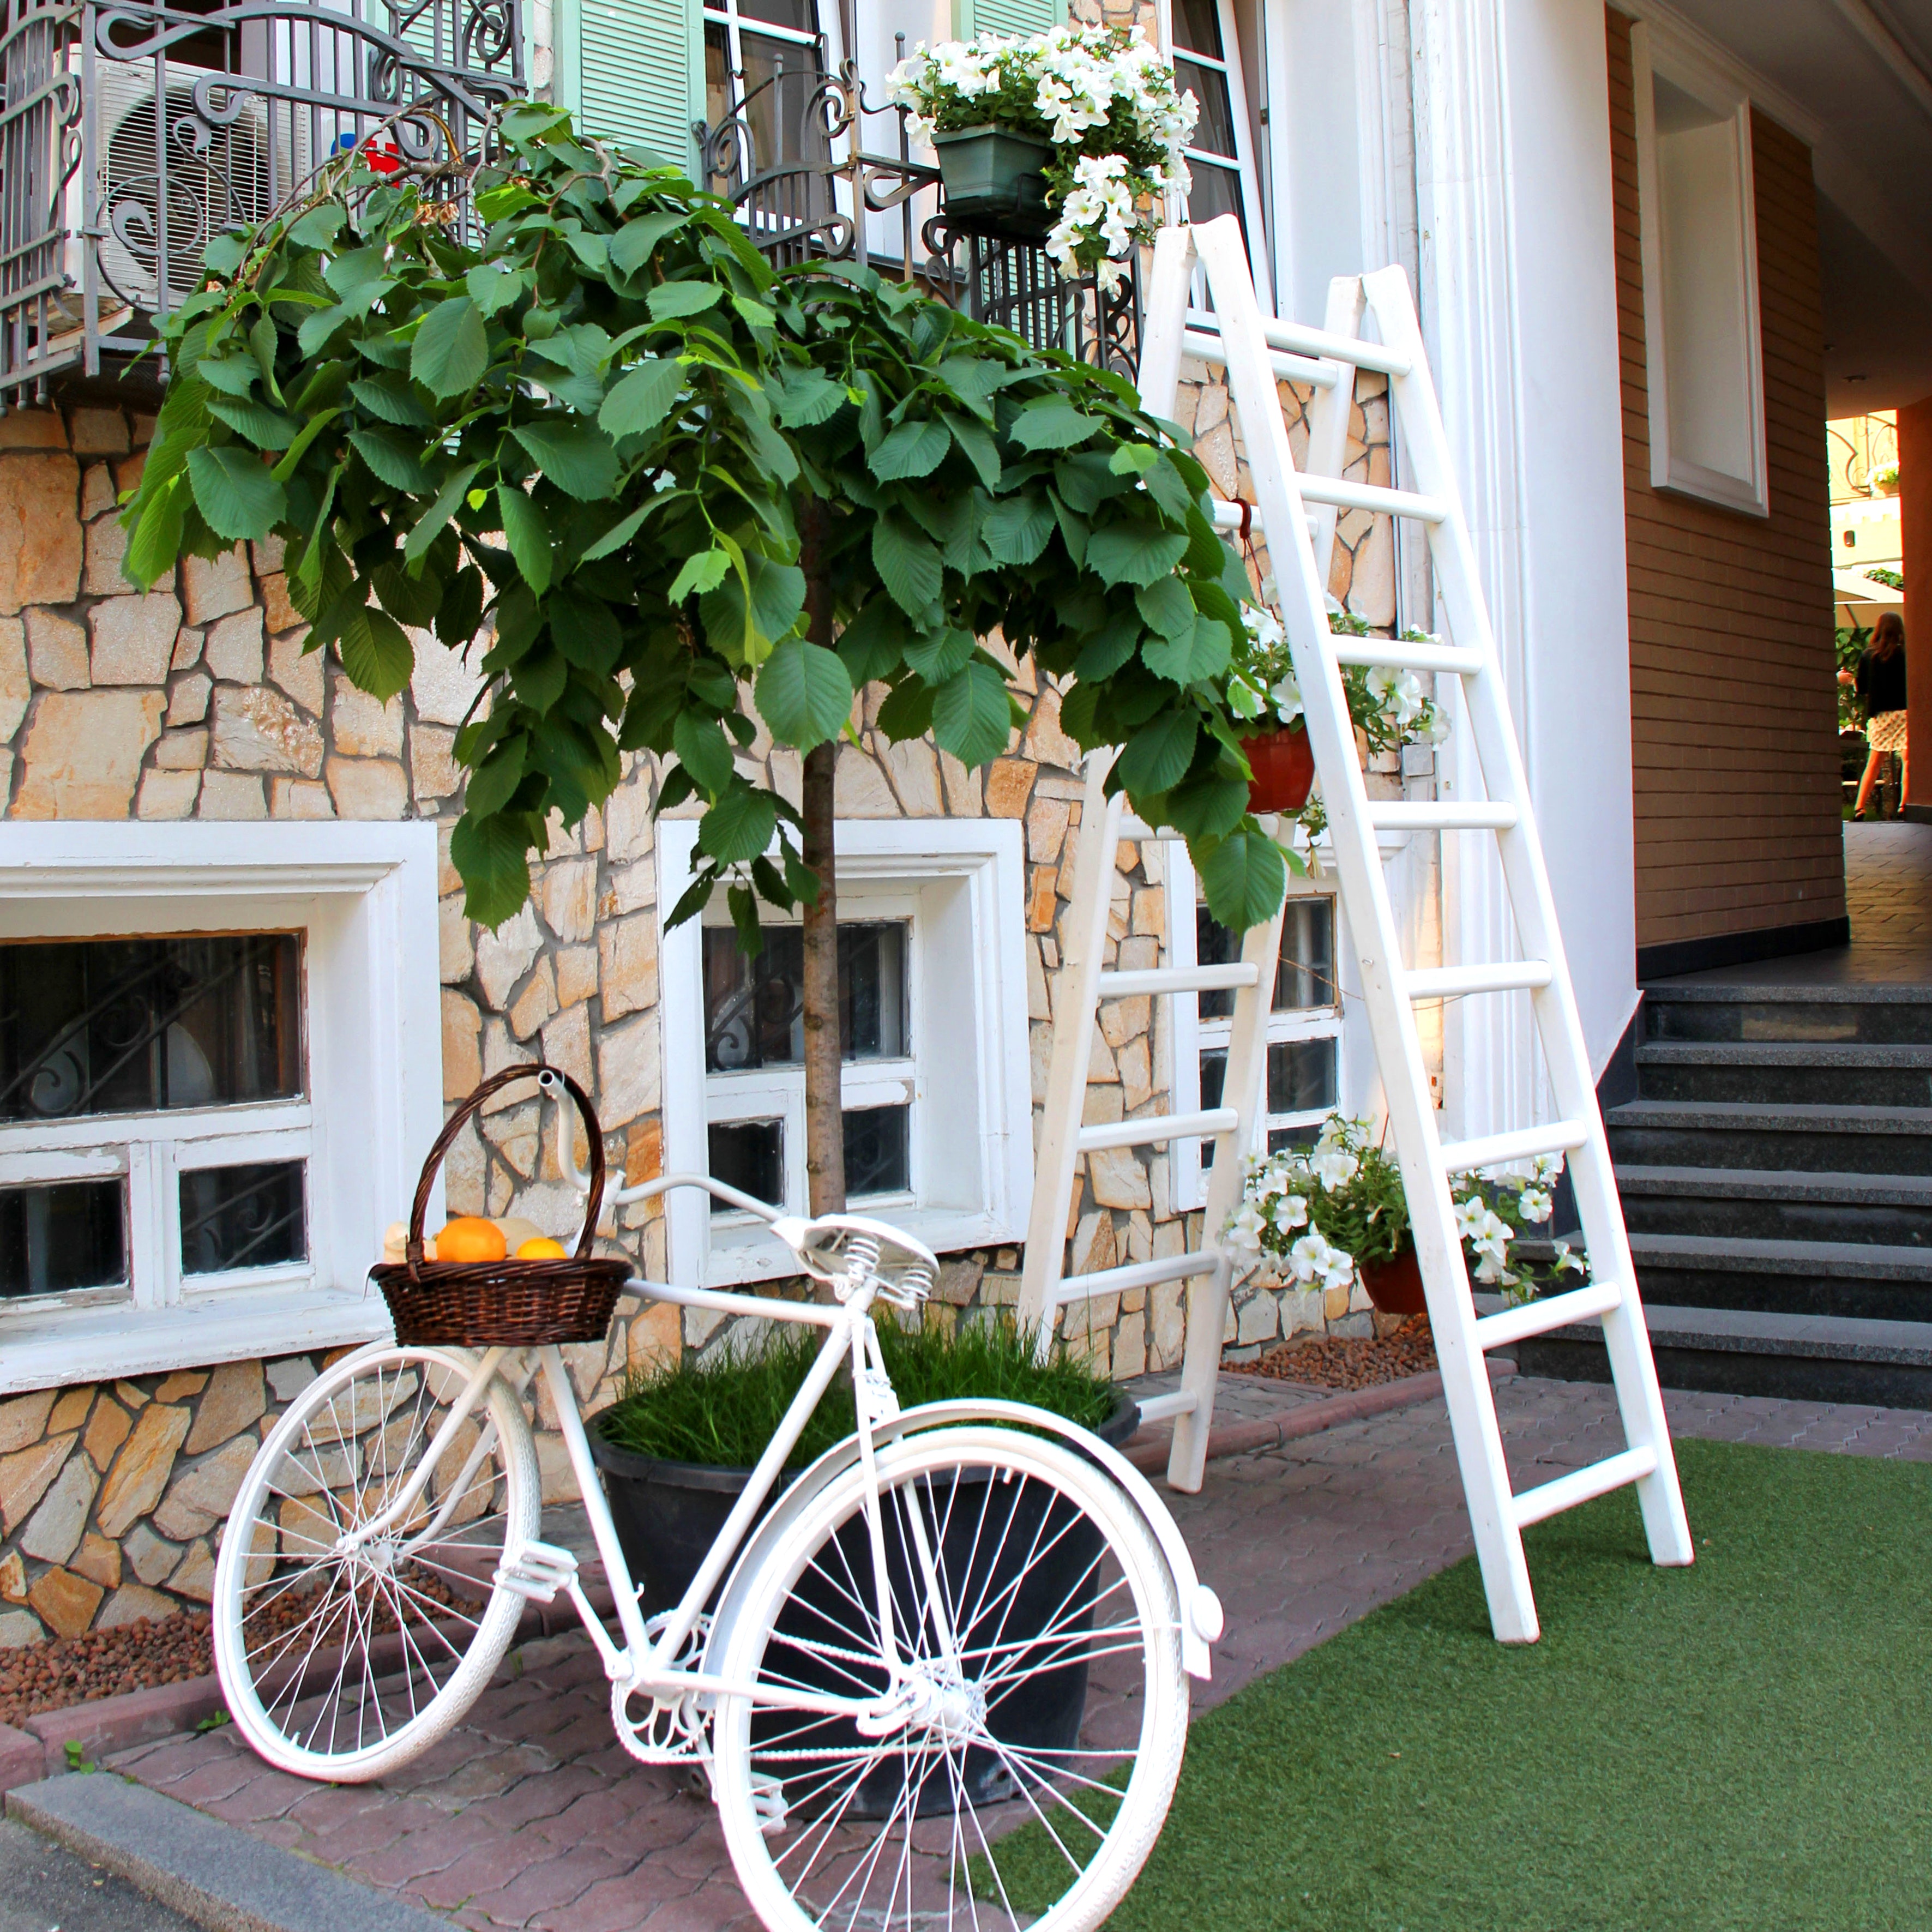 White step through bicycle leaning beside tree plant photo